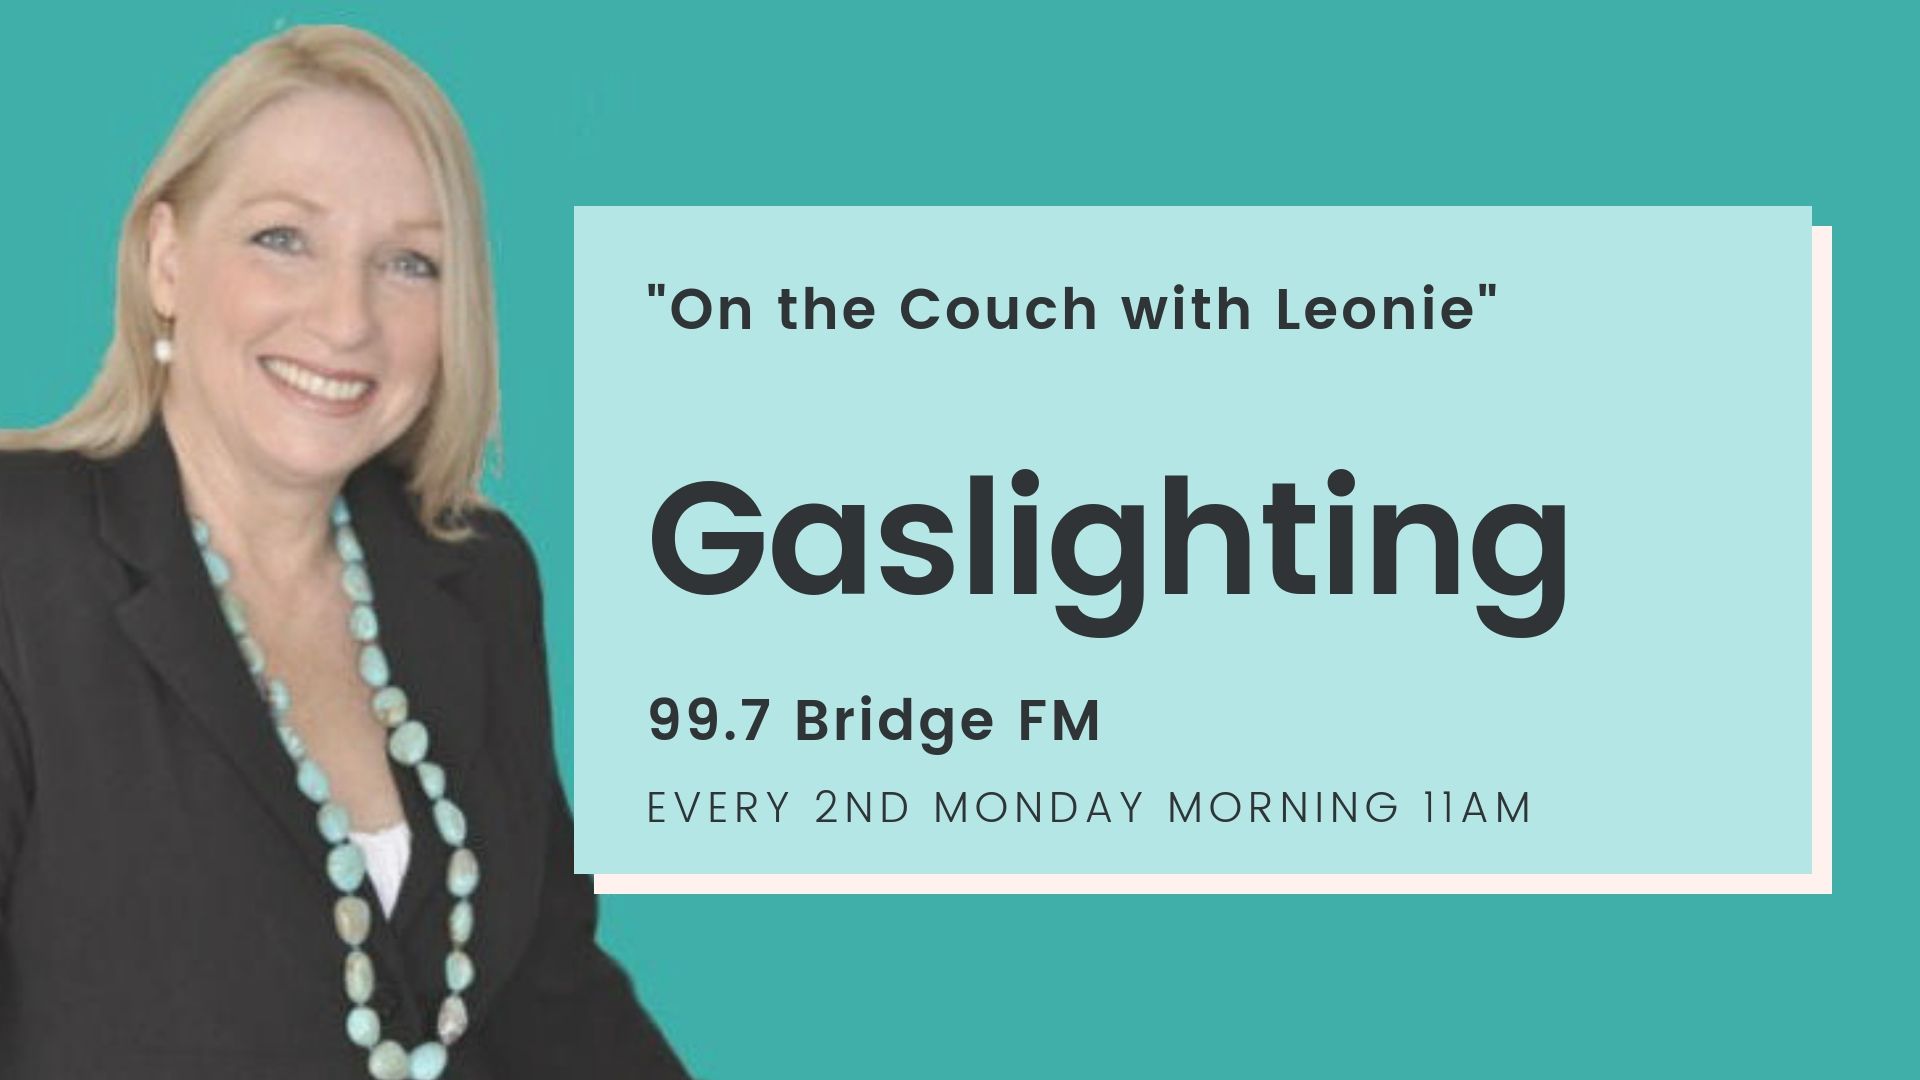 Gaslighting - On the Couch with Leonie